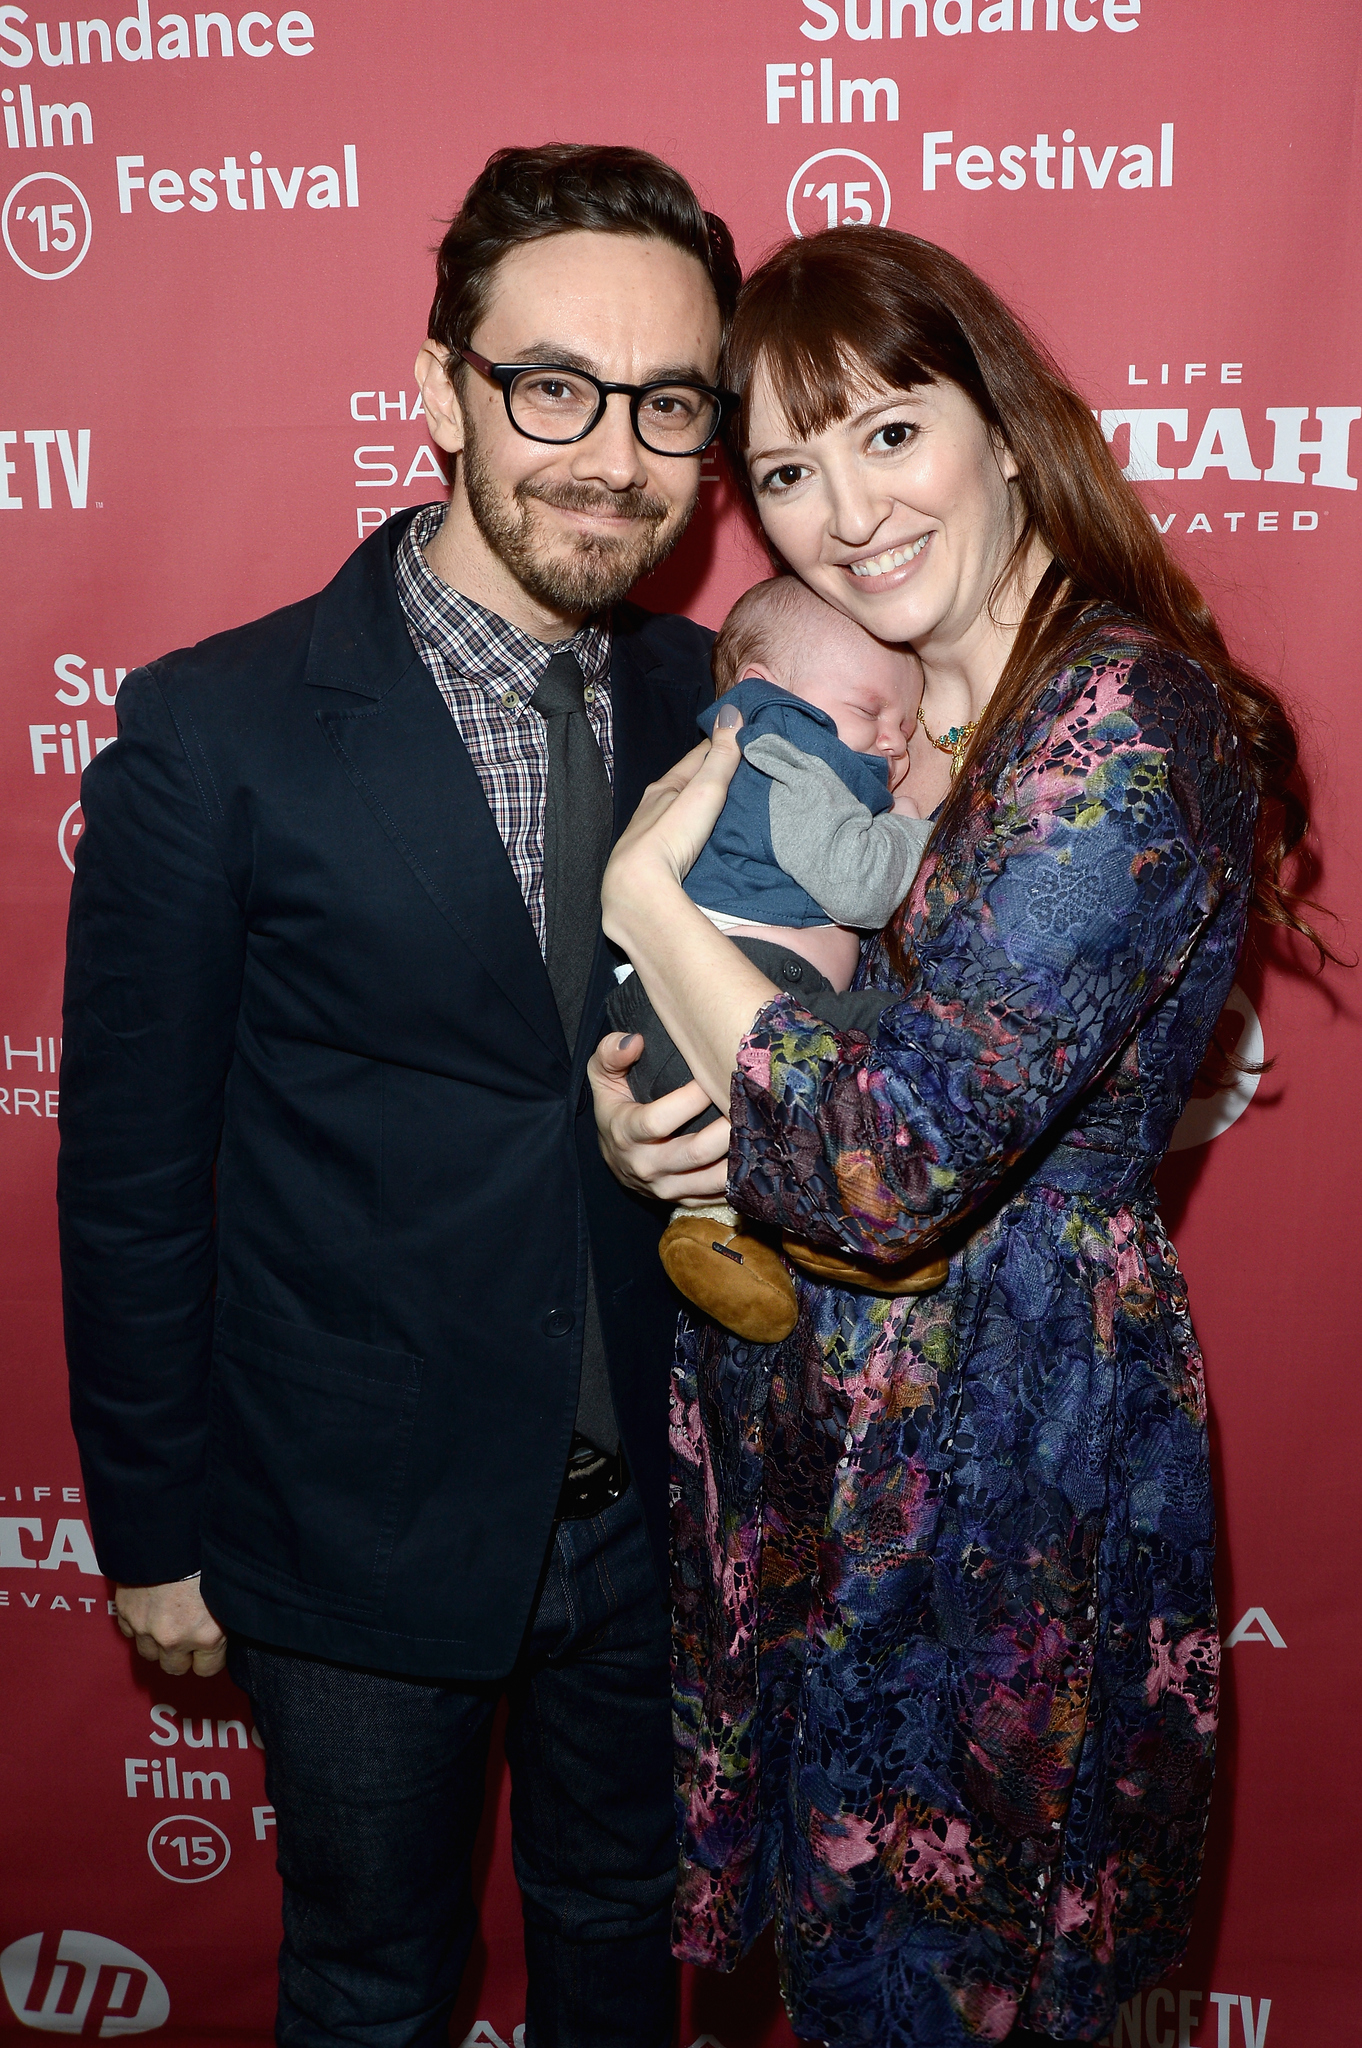 Jorma Taccone and Marielle Heller at event of The Diary of a Teenage Girl (2015)